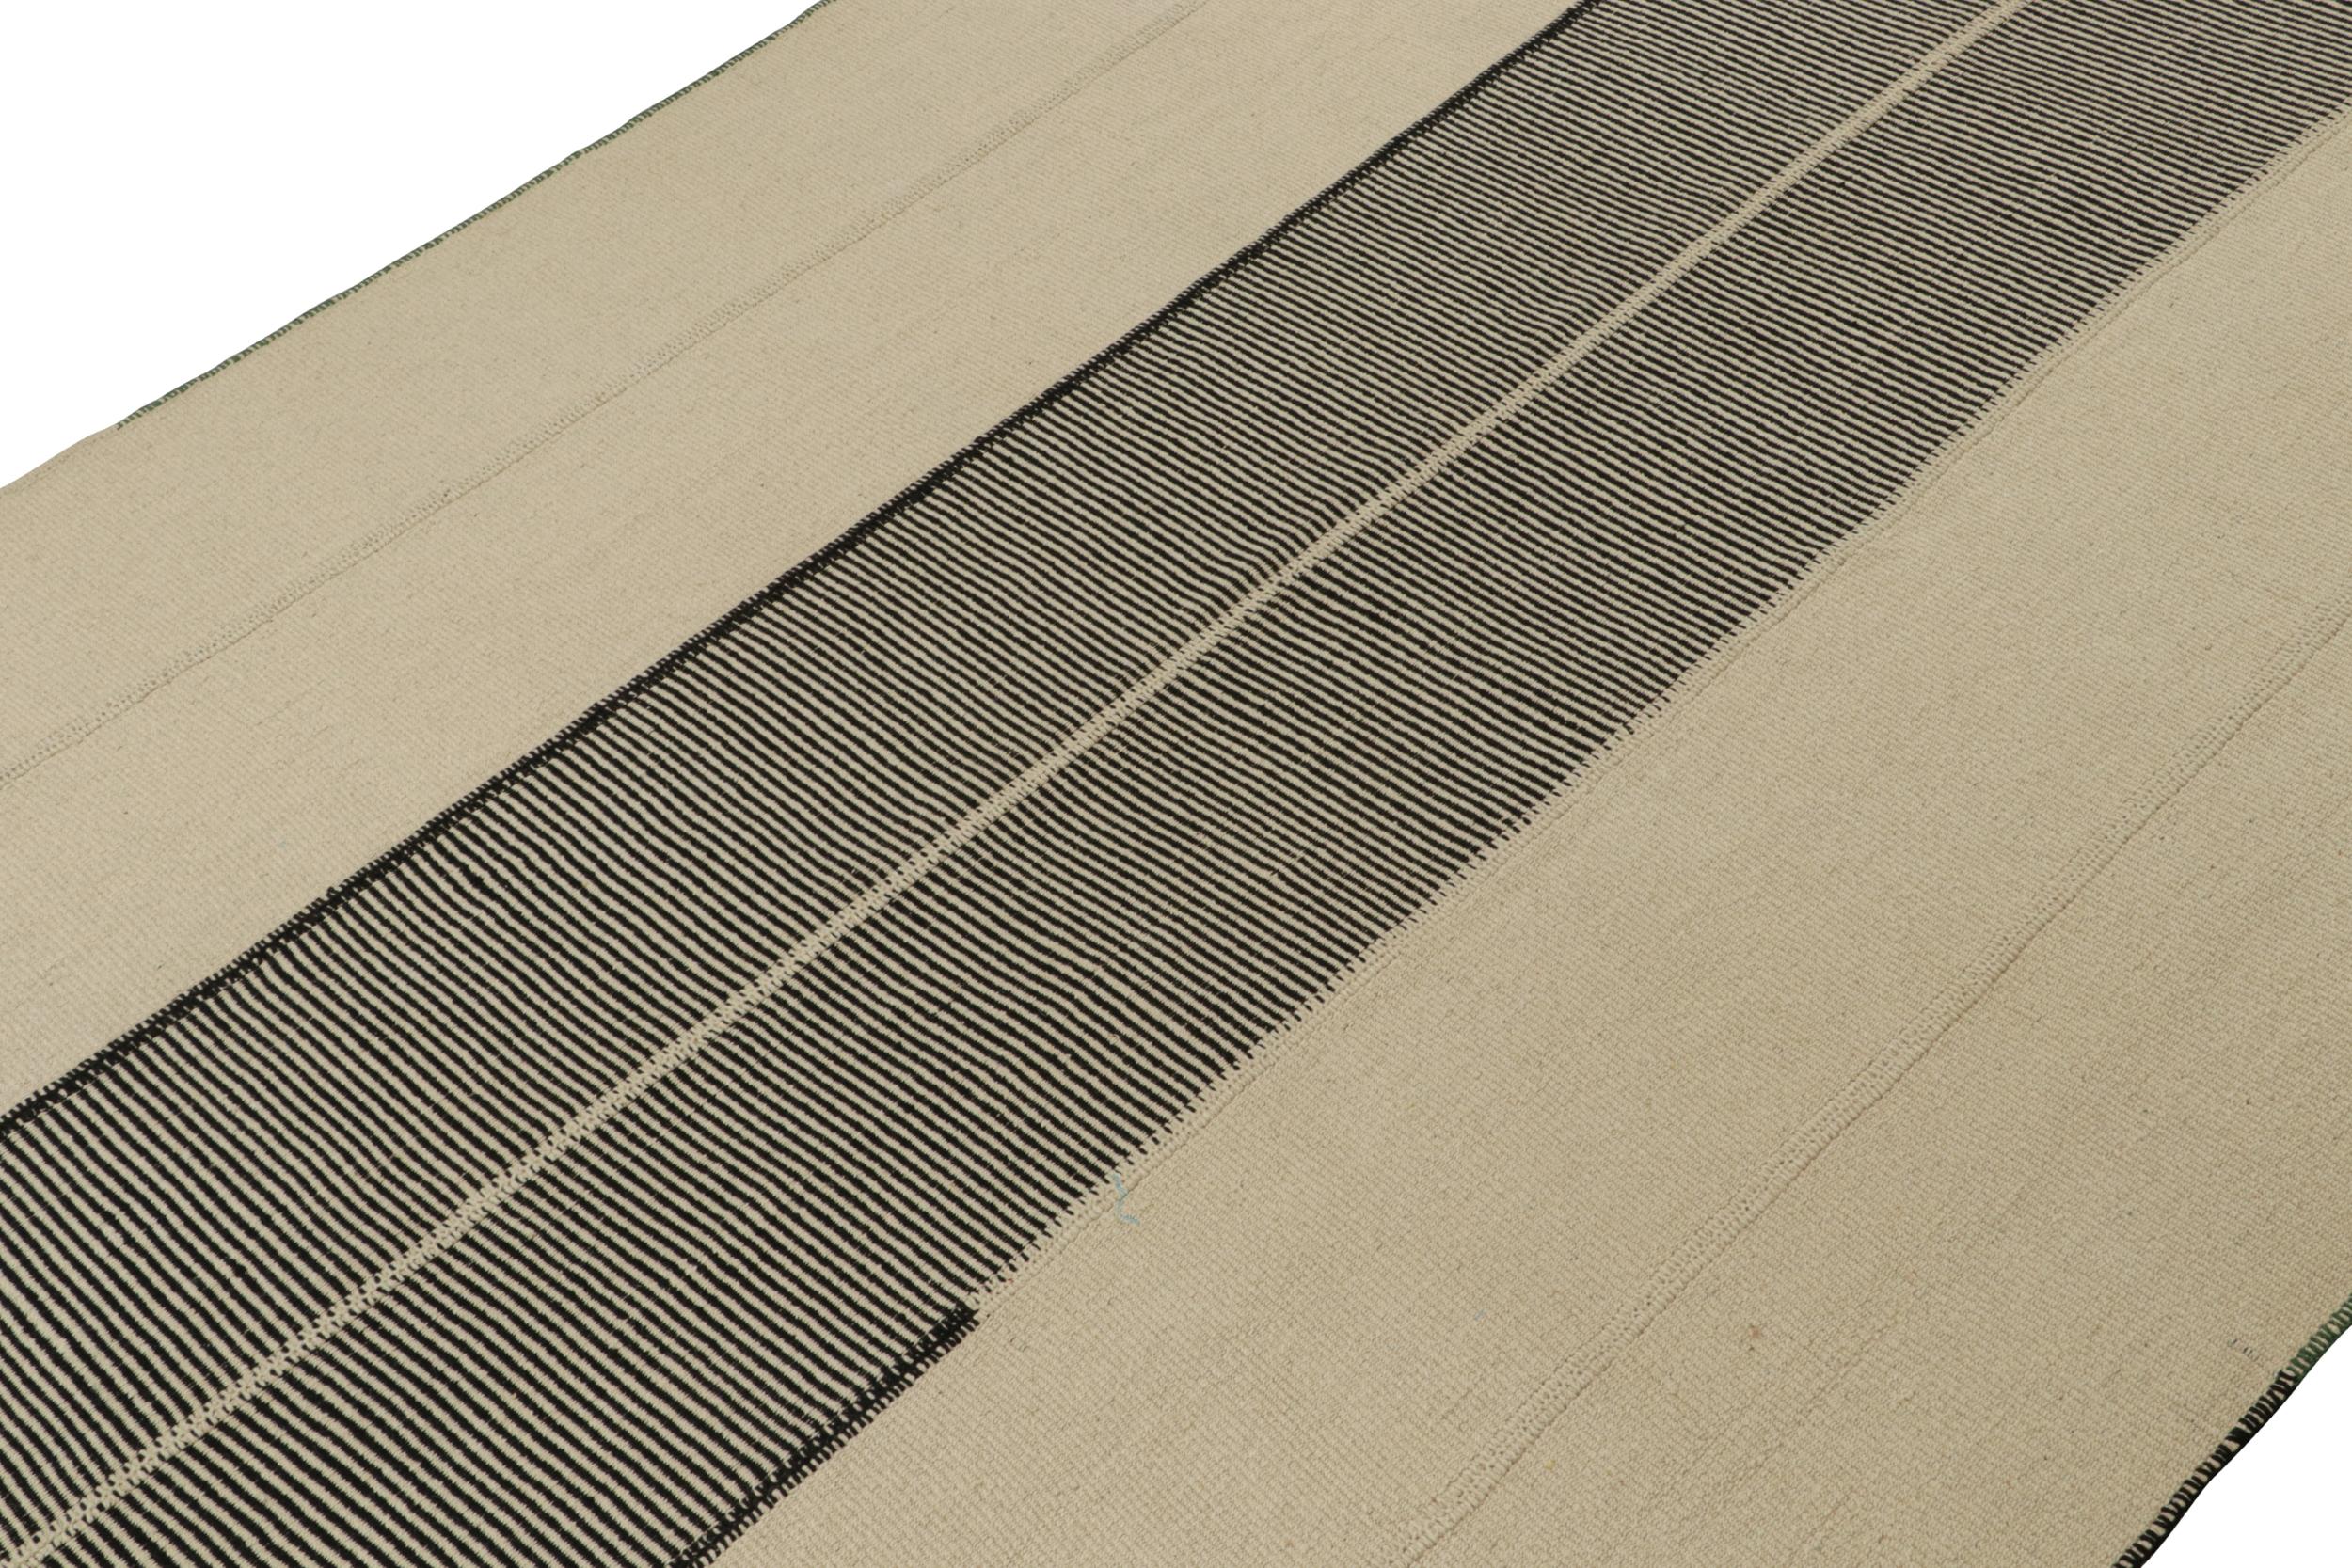 Handwoven in wool, a 10x14 Kilim from a bold new line of contemporary flatweaves by Rug & Kilim.

On the Design: 

Connoting a modern take on classic panel-weaving, our latest “Rez Kilim” enjoys beige and black tones. Keen eyes will admire how this